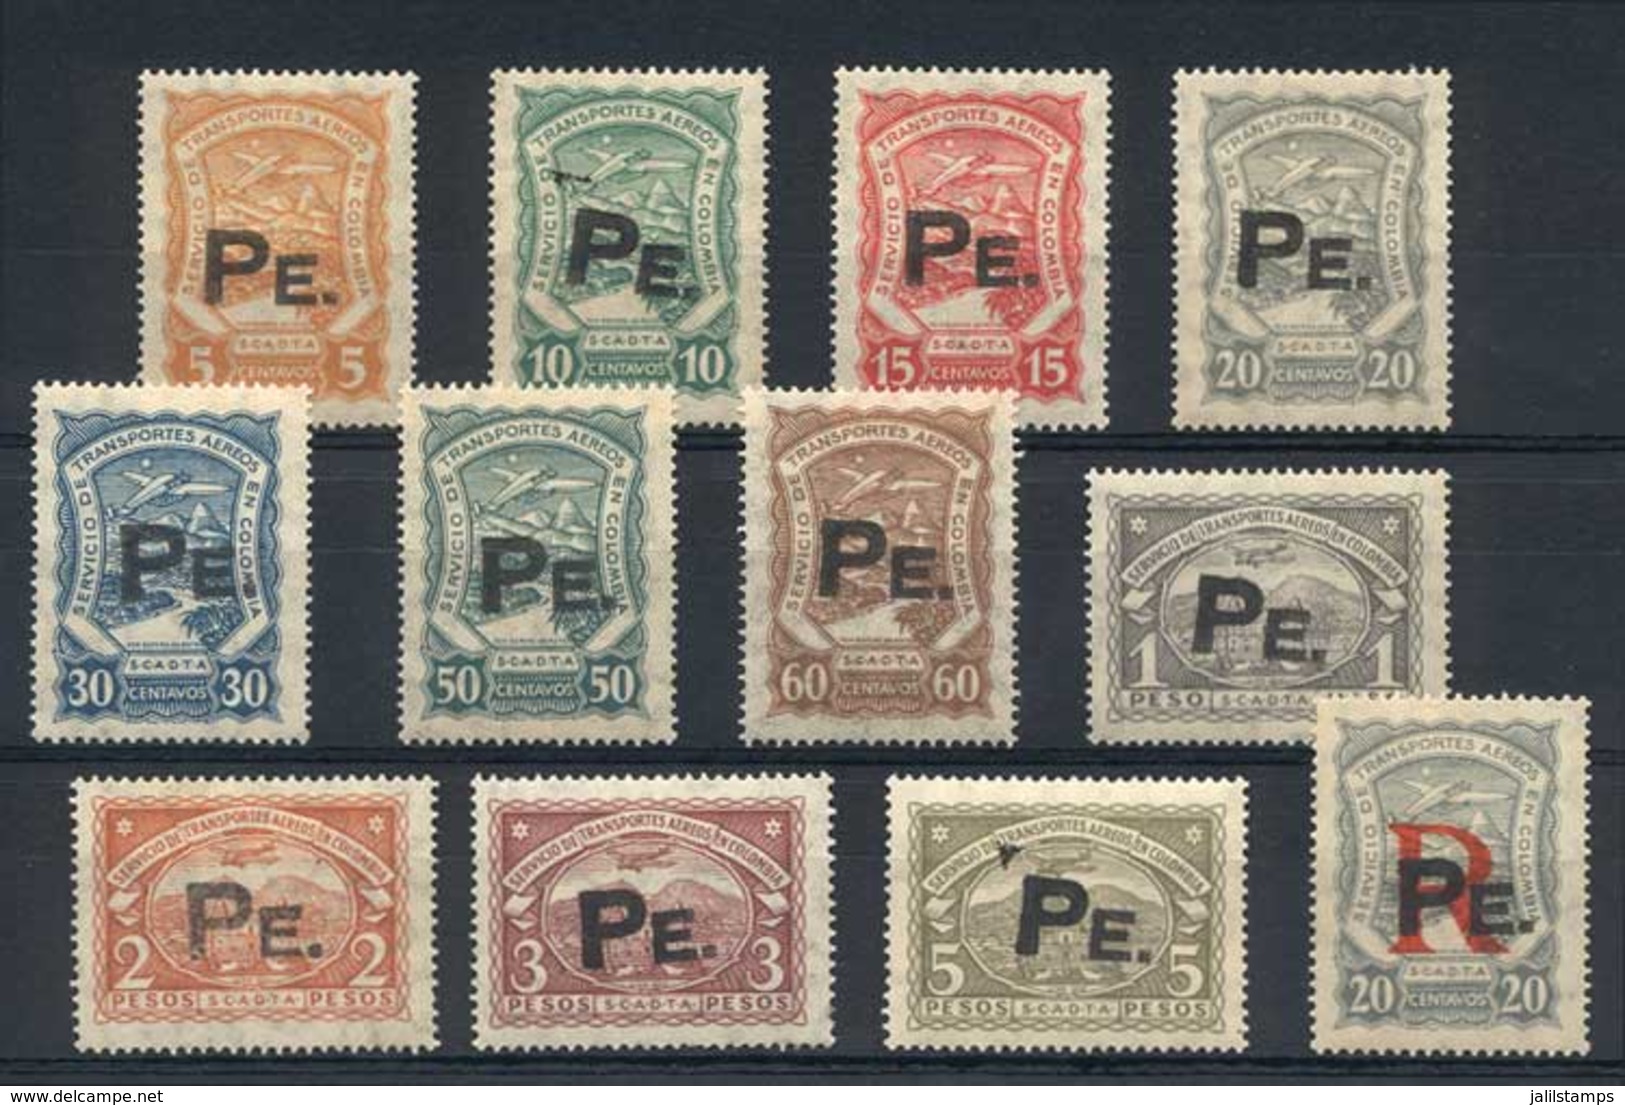 COLOMBIA: Scott CLPE1/CFLPE1, 1923 Complete Set Of 12 Values, Mint Never Hinged With Overprint In Intense Black, Excelle - Colombie